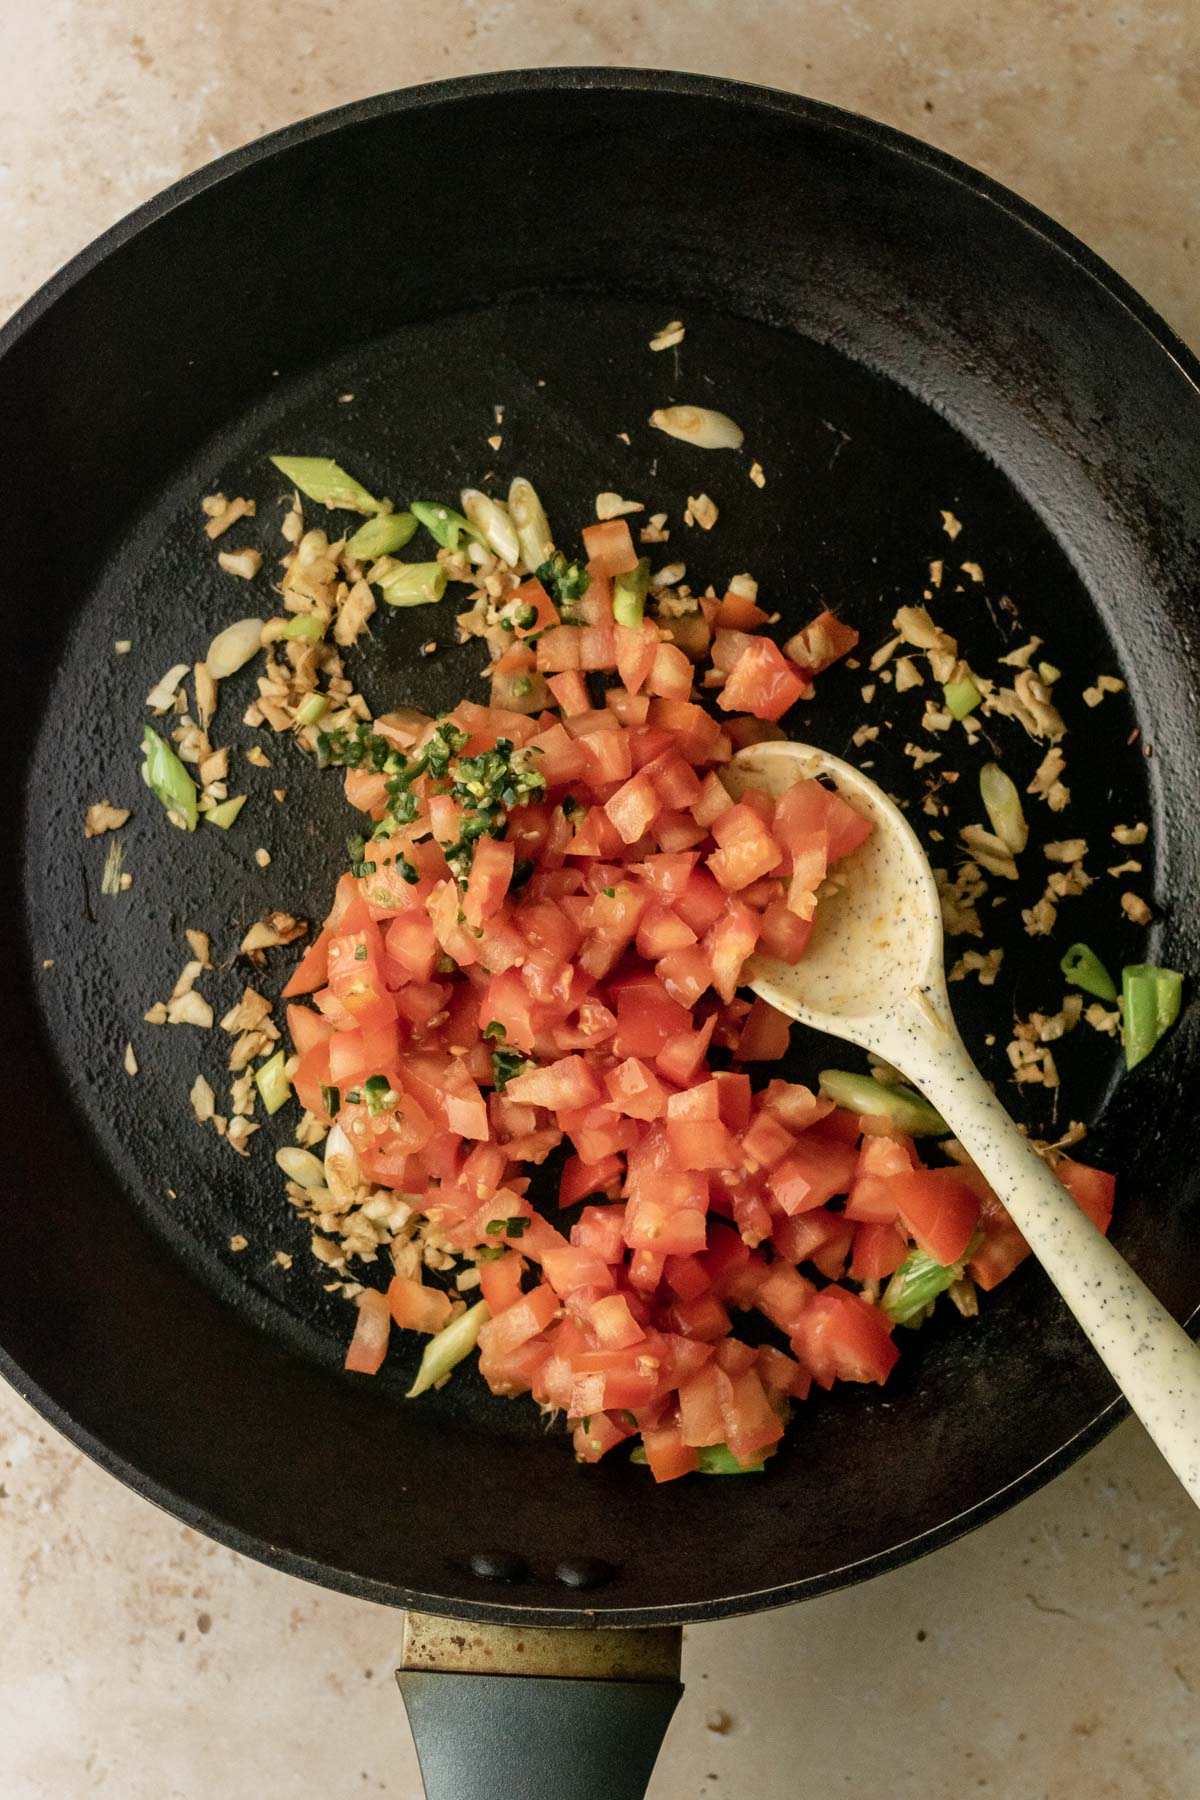 tomatoes and green chillies in a frying pan with other ingredients